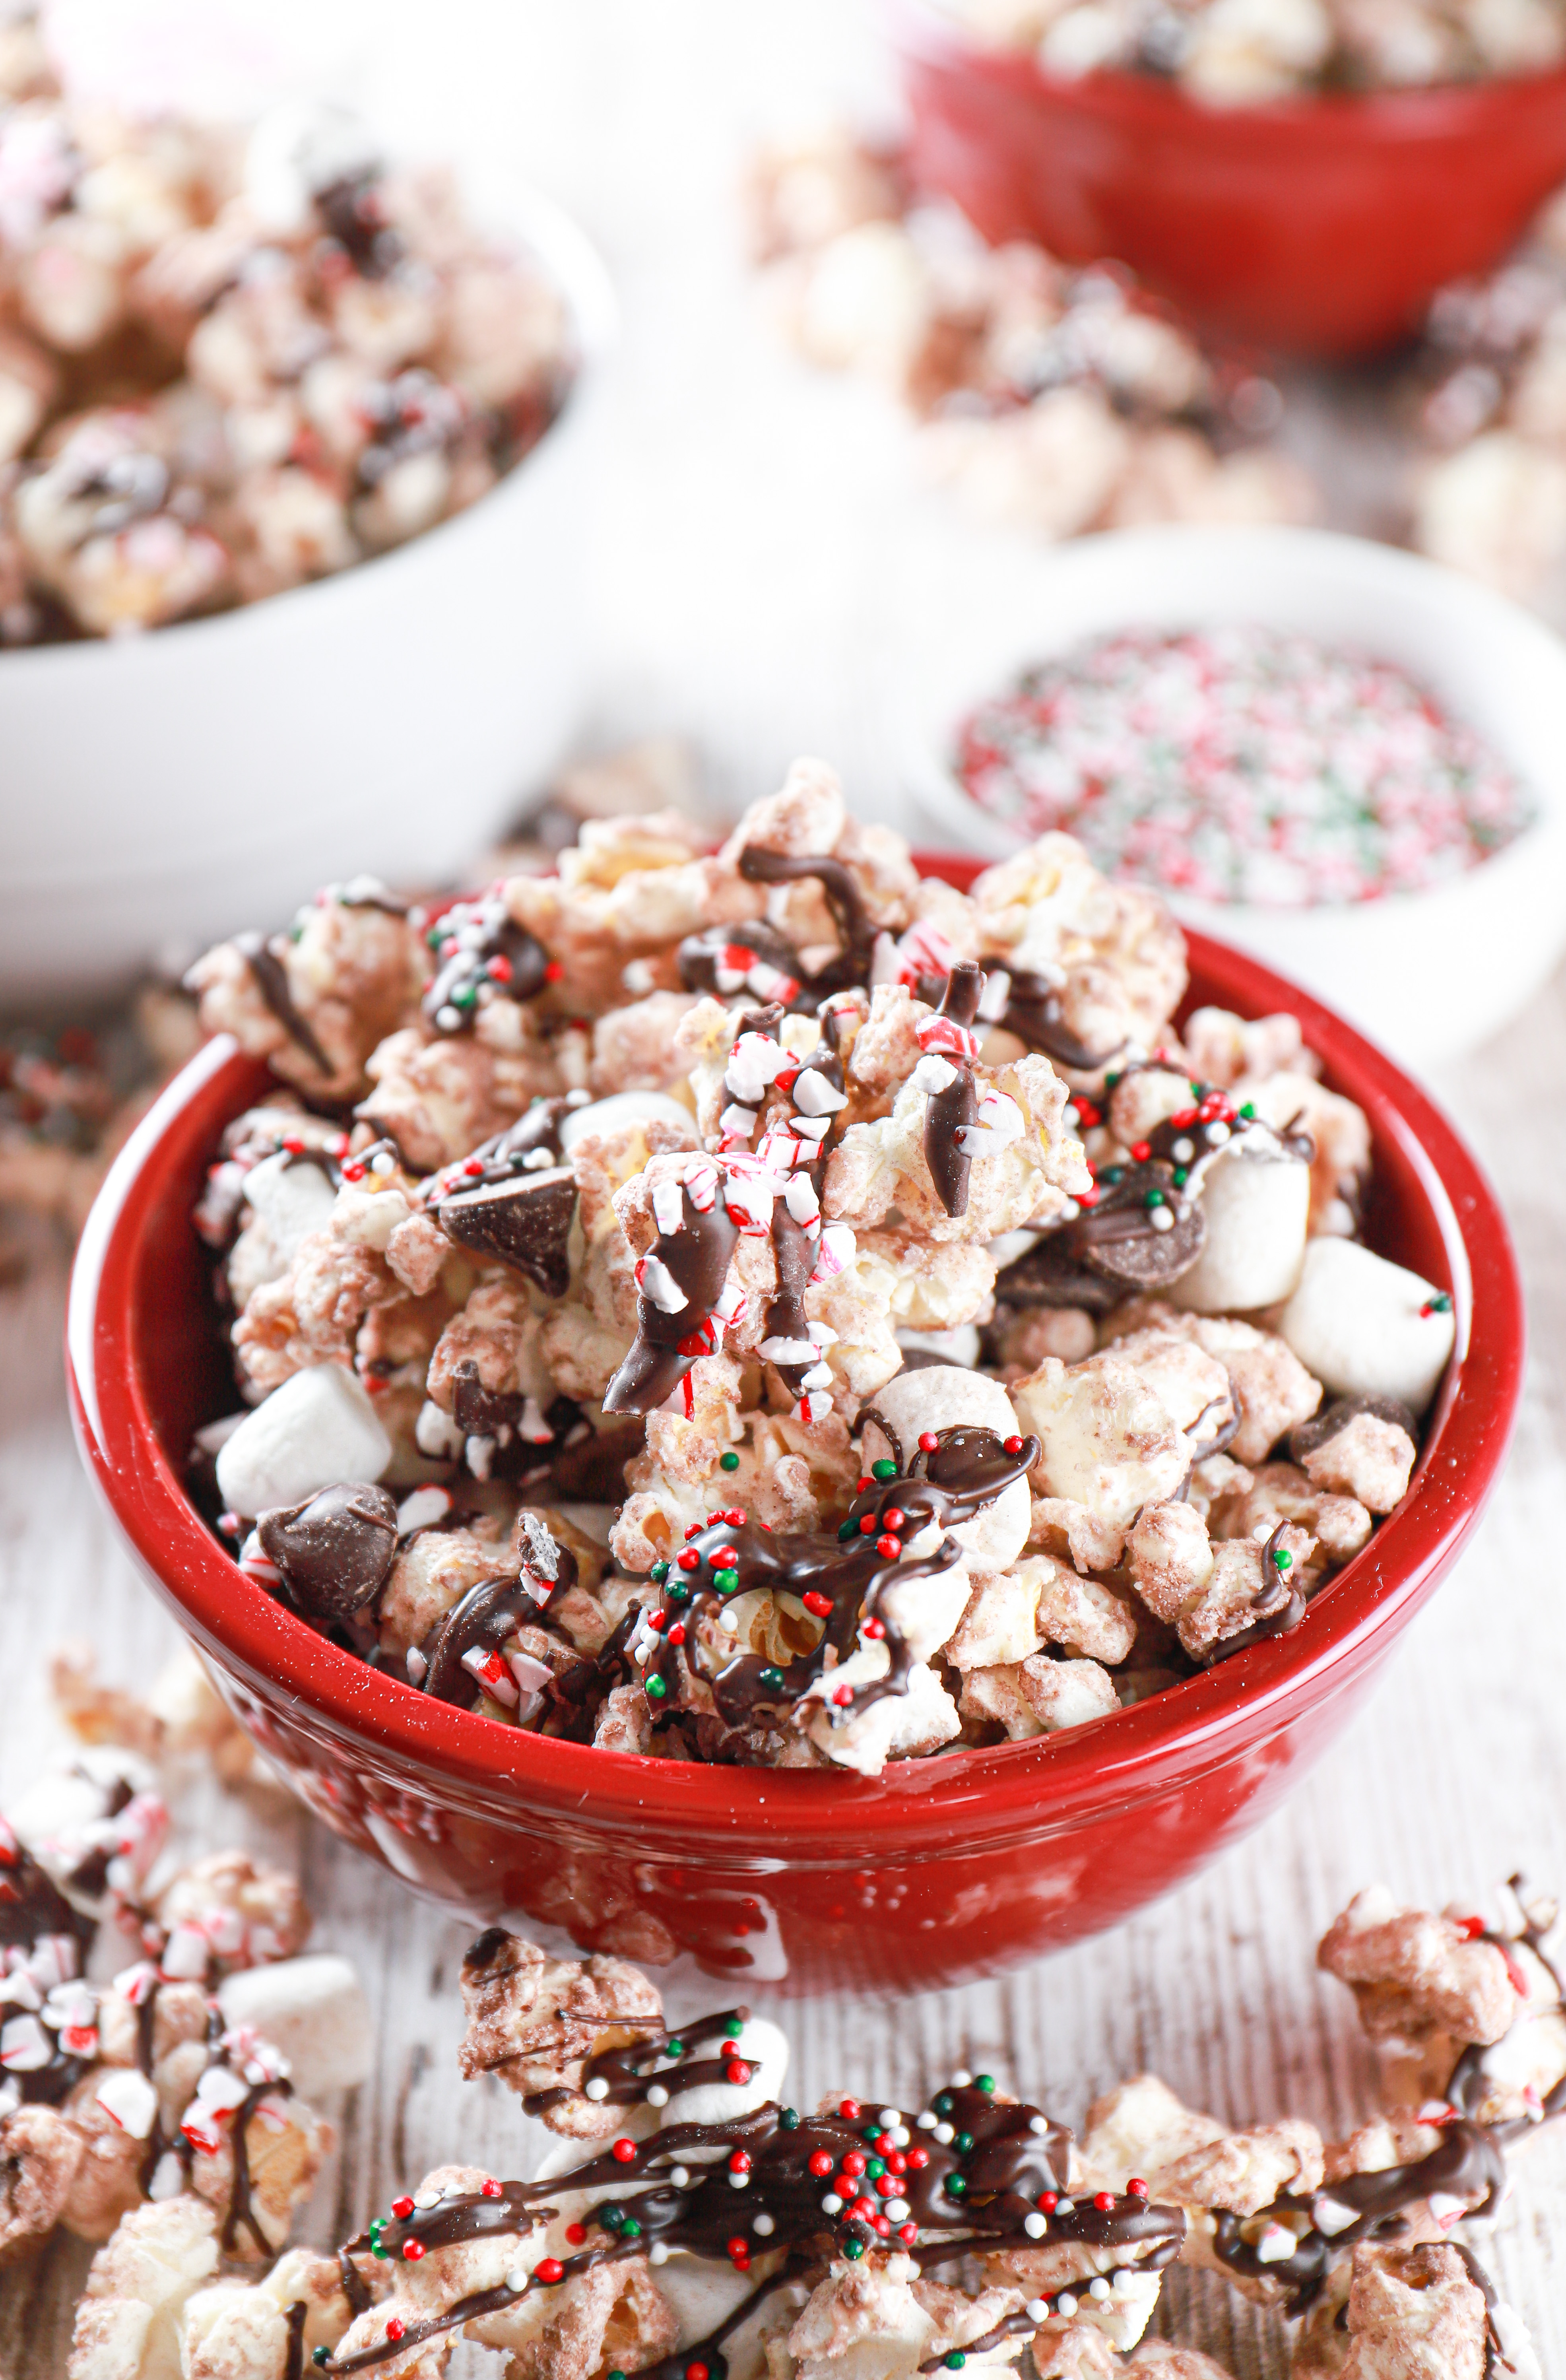 Hot chocolate popcorn in a small red bowl with popcorn surrounding the bowl.